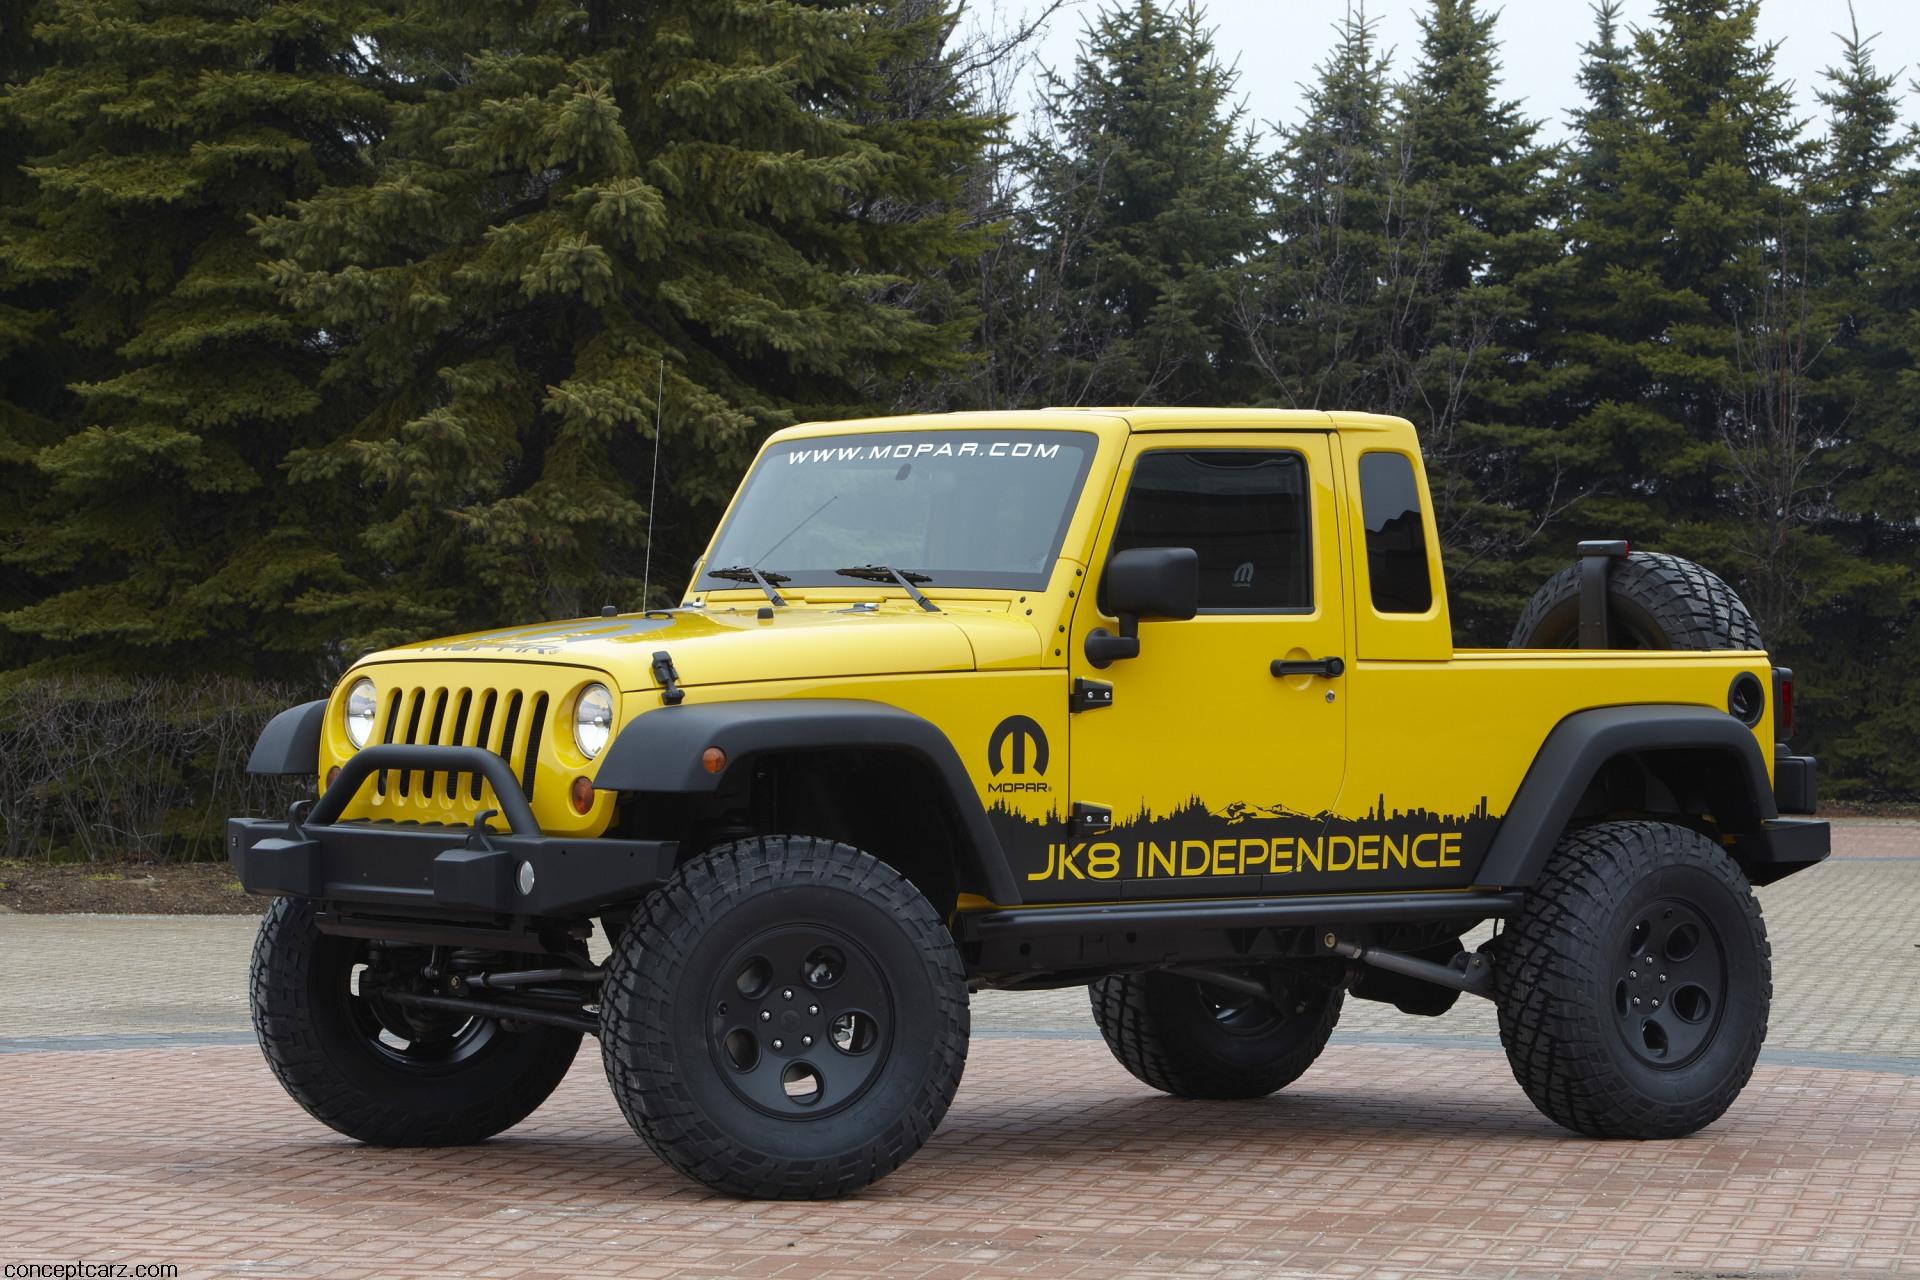 PC Wallpapers vehicles, jeep